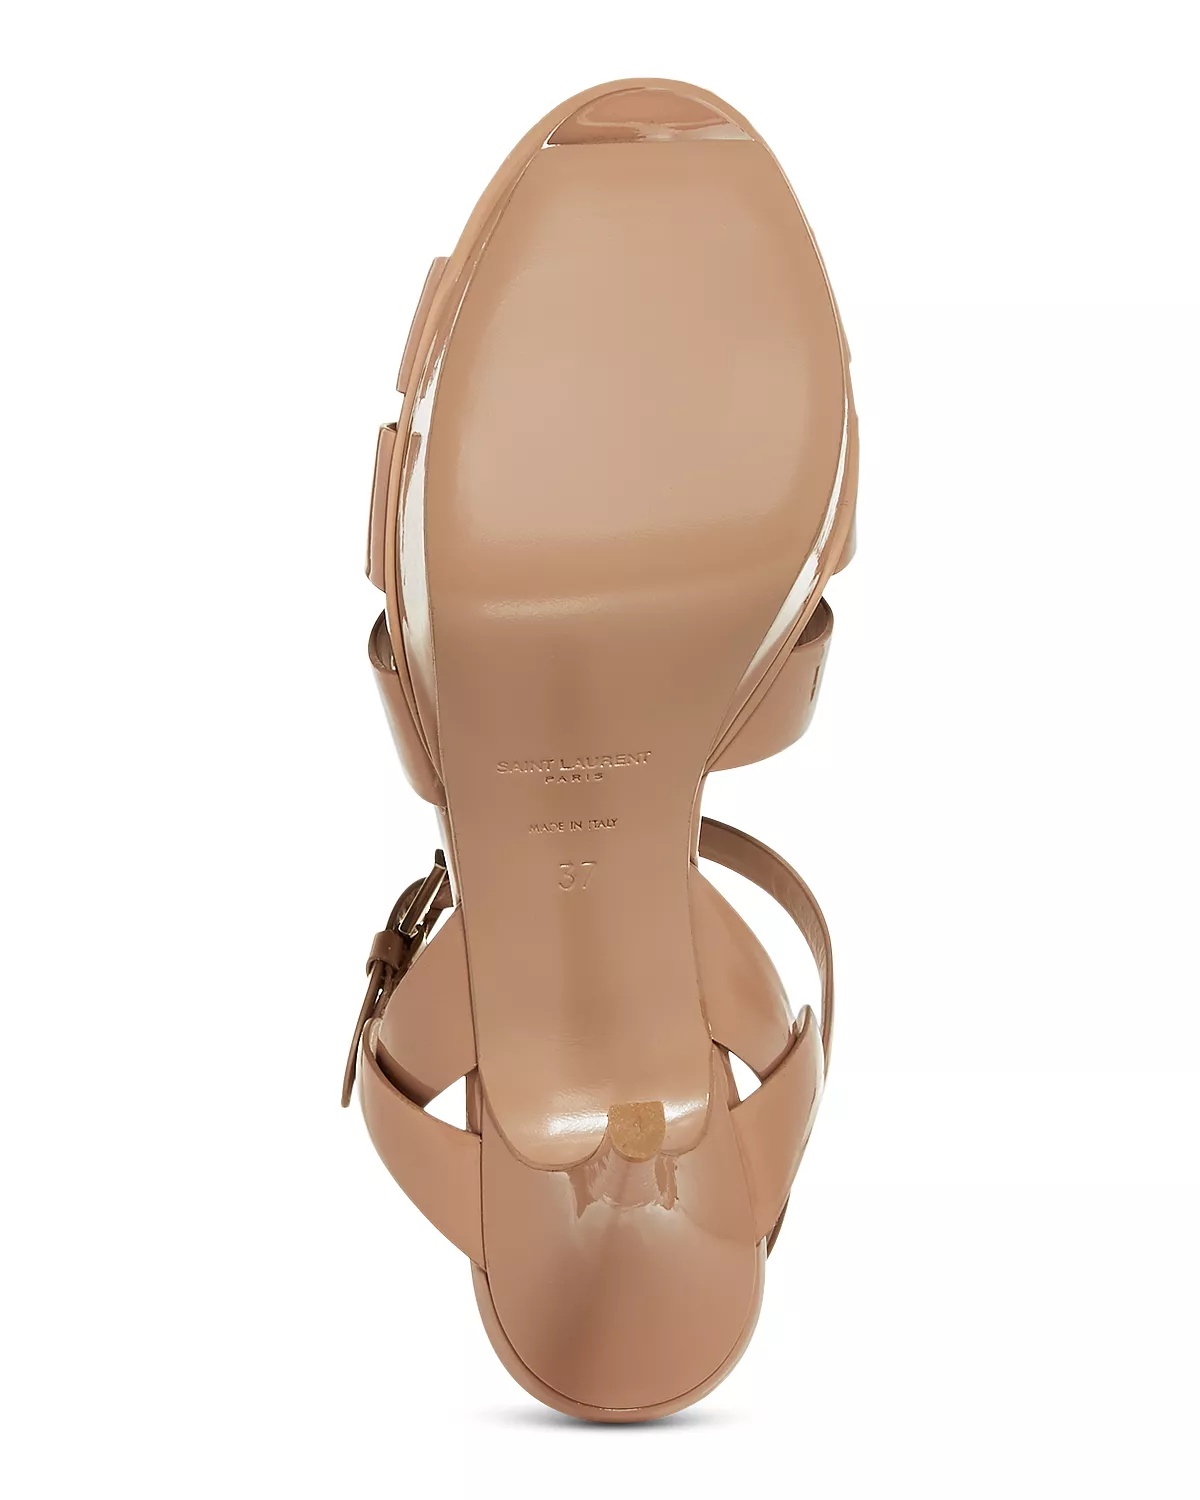 Tribute Platform Sandals in Smooth Leather - 7